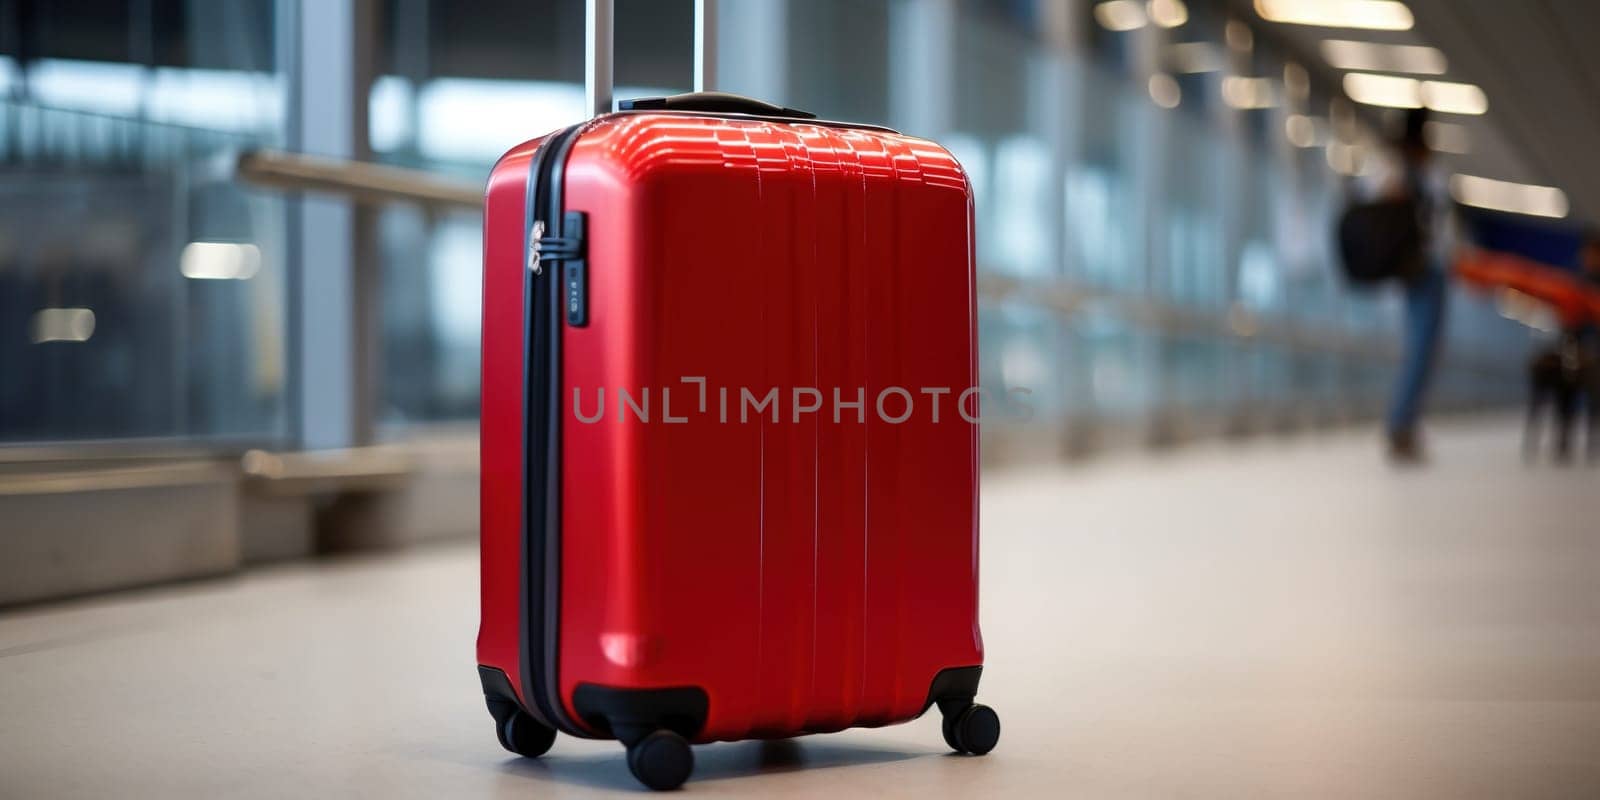 Red Suitcase In Airport Hall by tan4ikk1